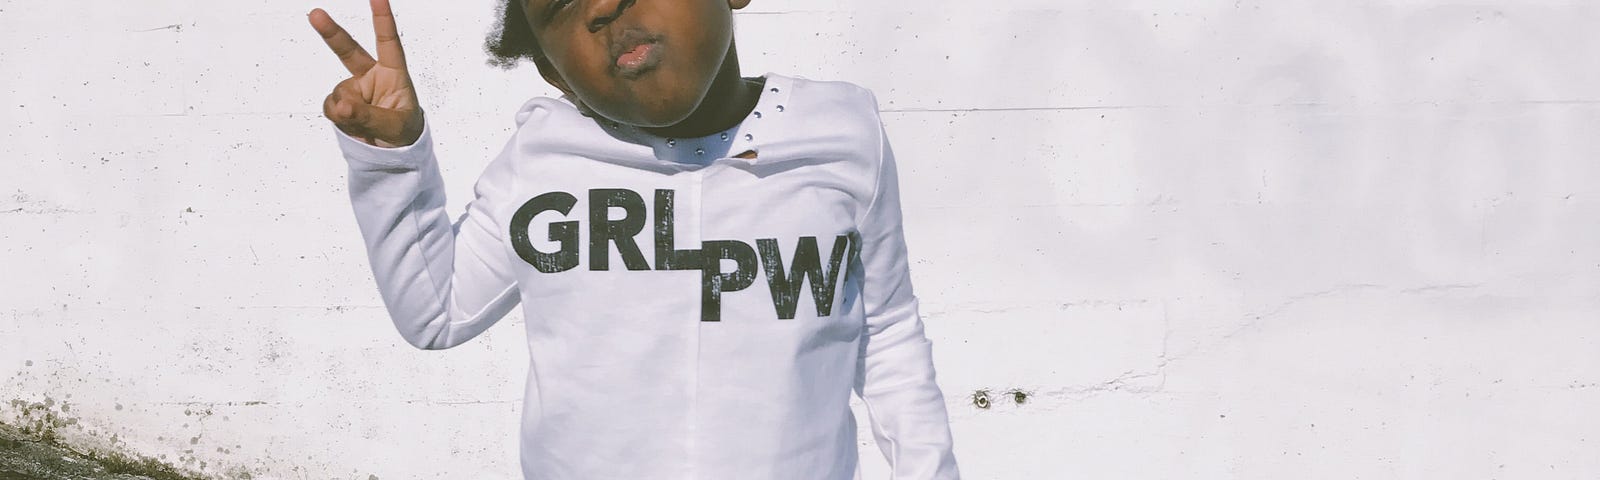 Kiana Bosman @capturedby_kiana portrait of young Black girl holding up a “peace sign” & wearing tee with words “GRL PWR.”